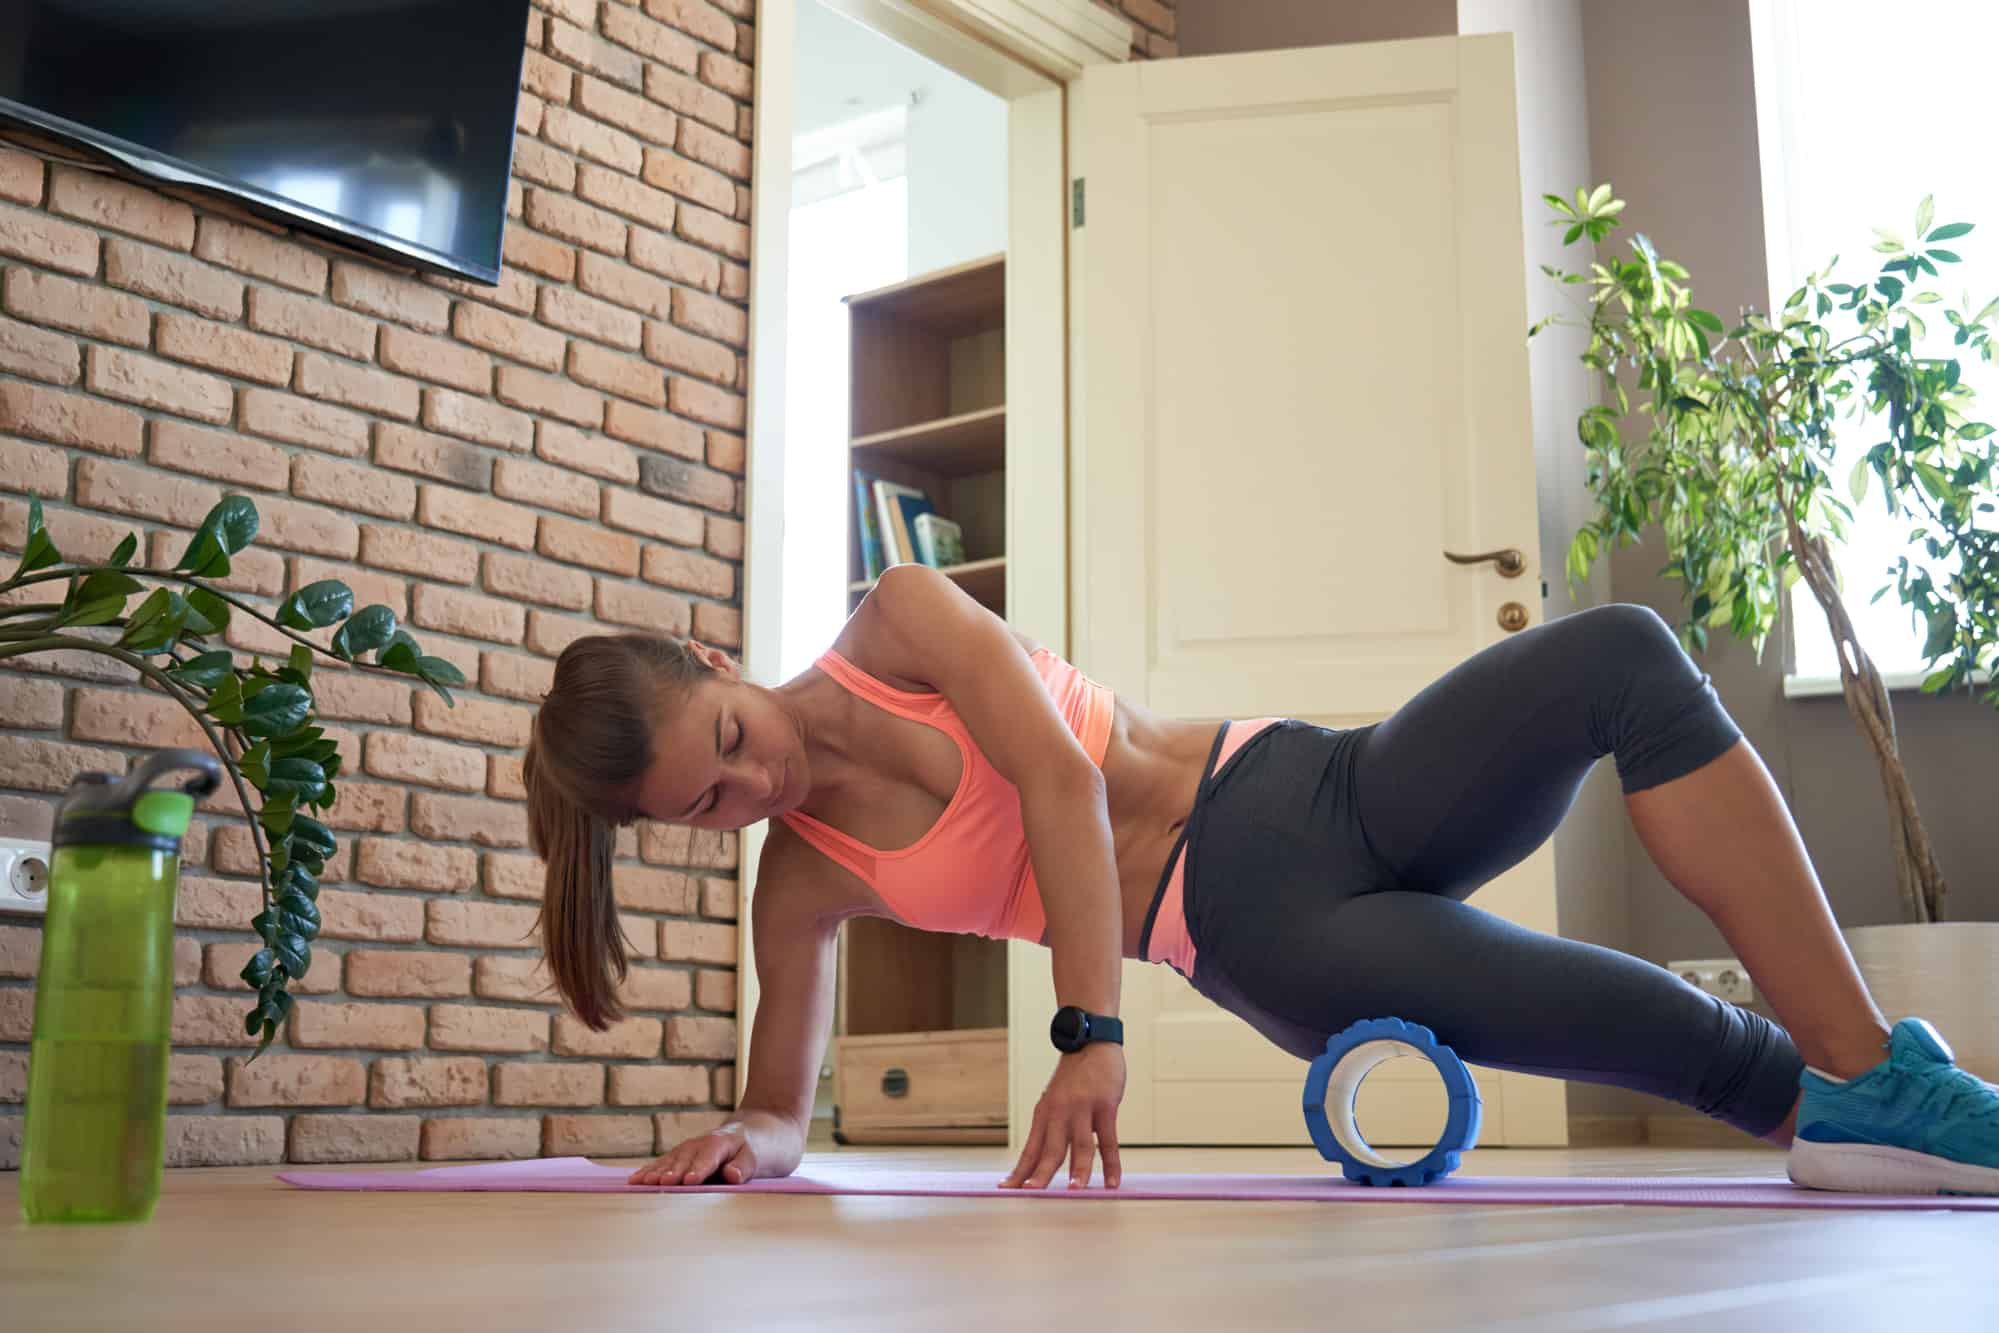 What Does Foam Rolling Do? - EMPOWER YOURWELLNESS